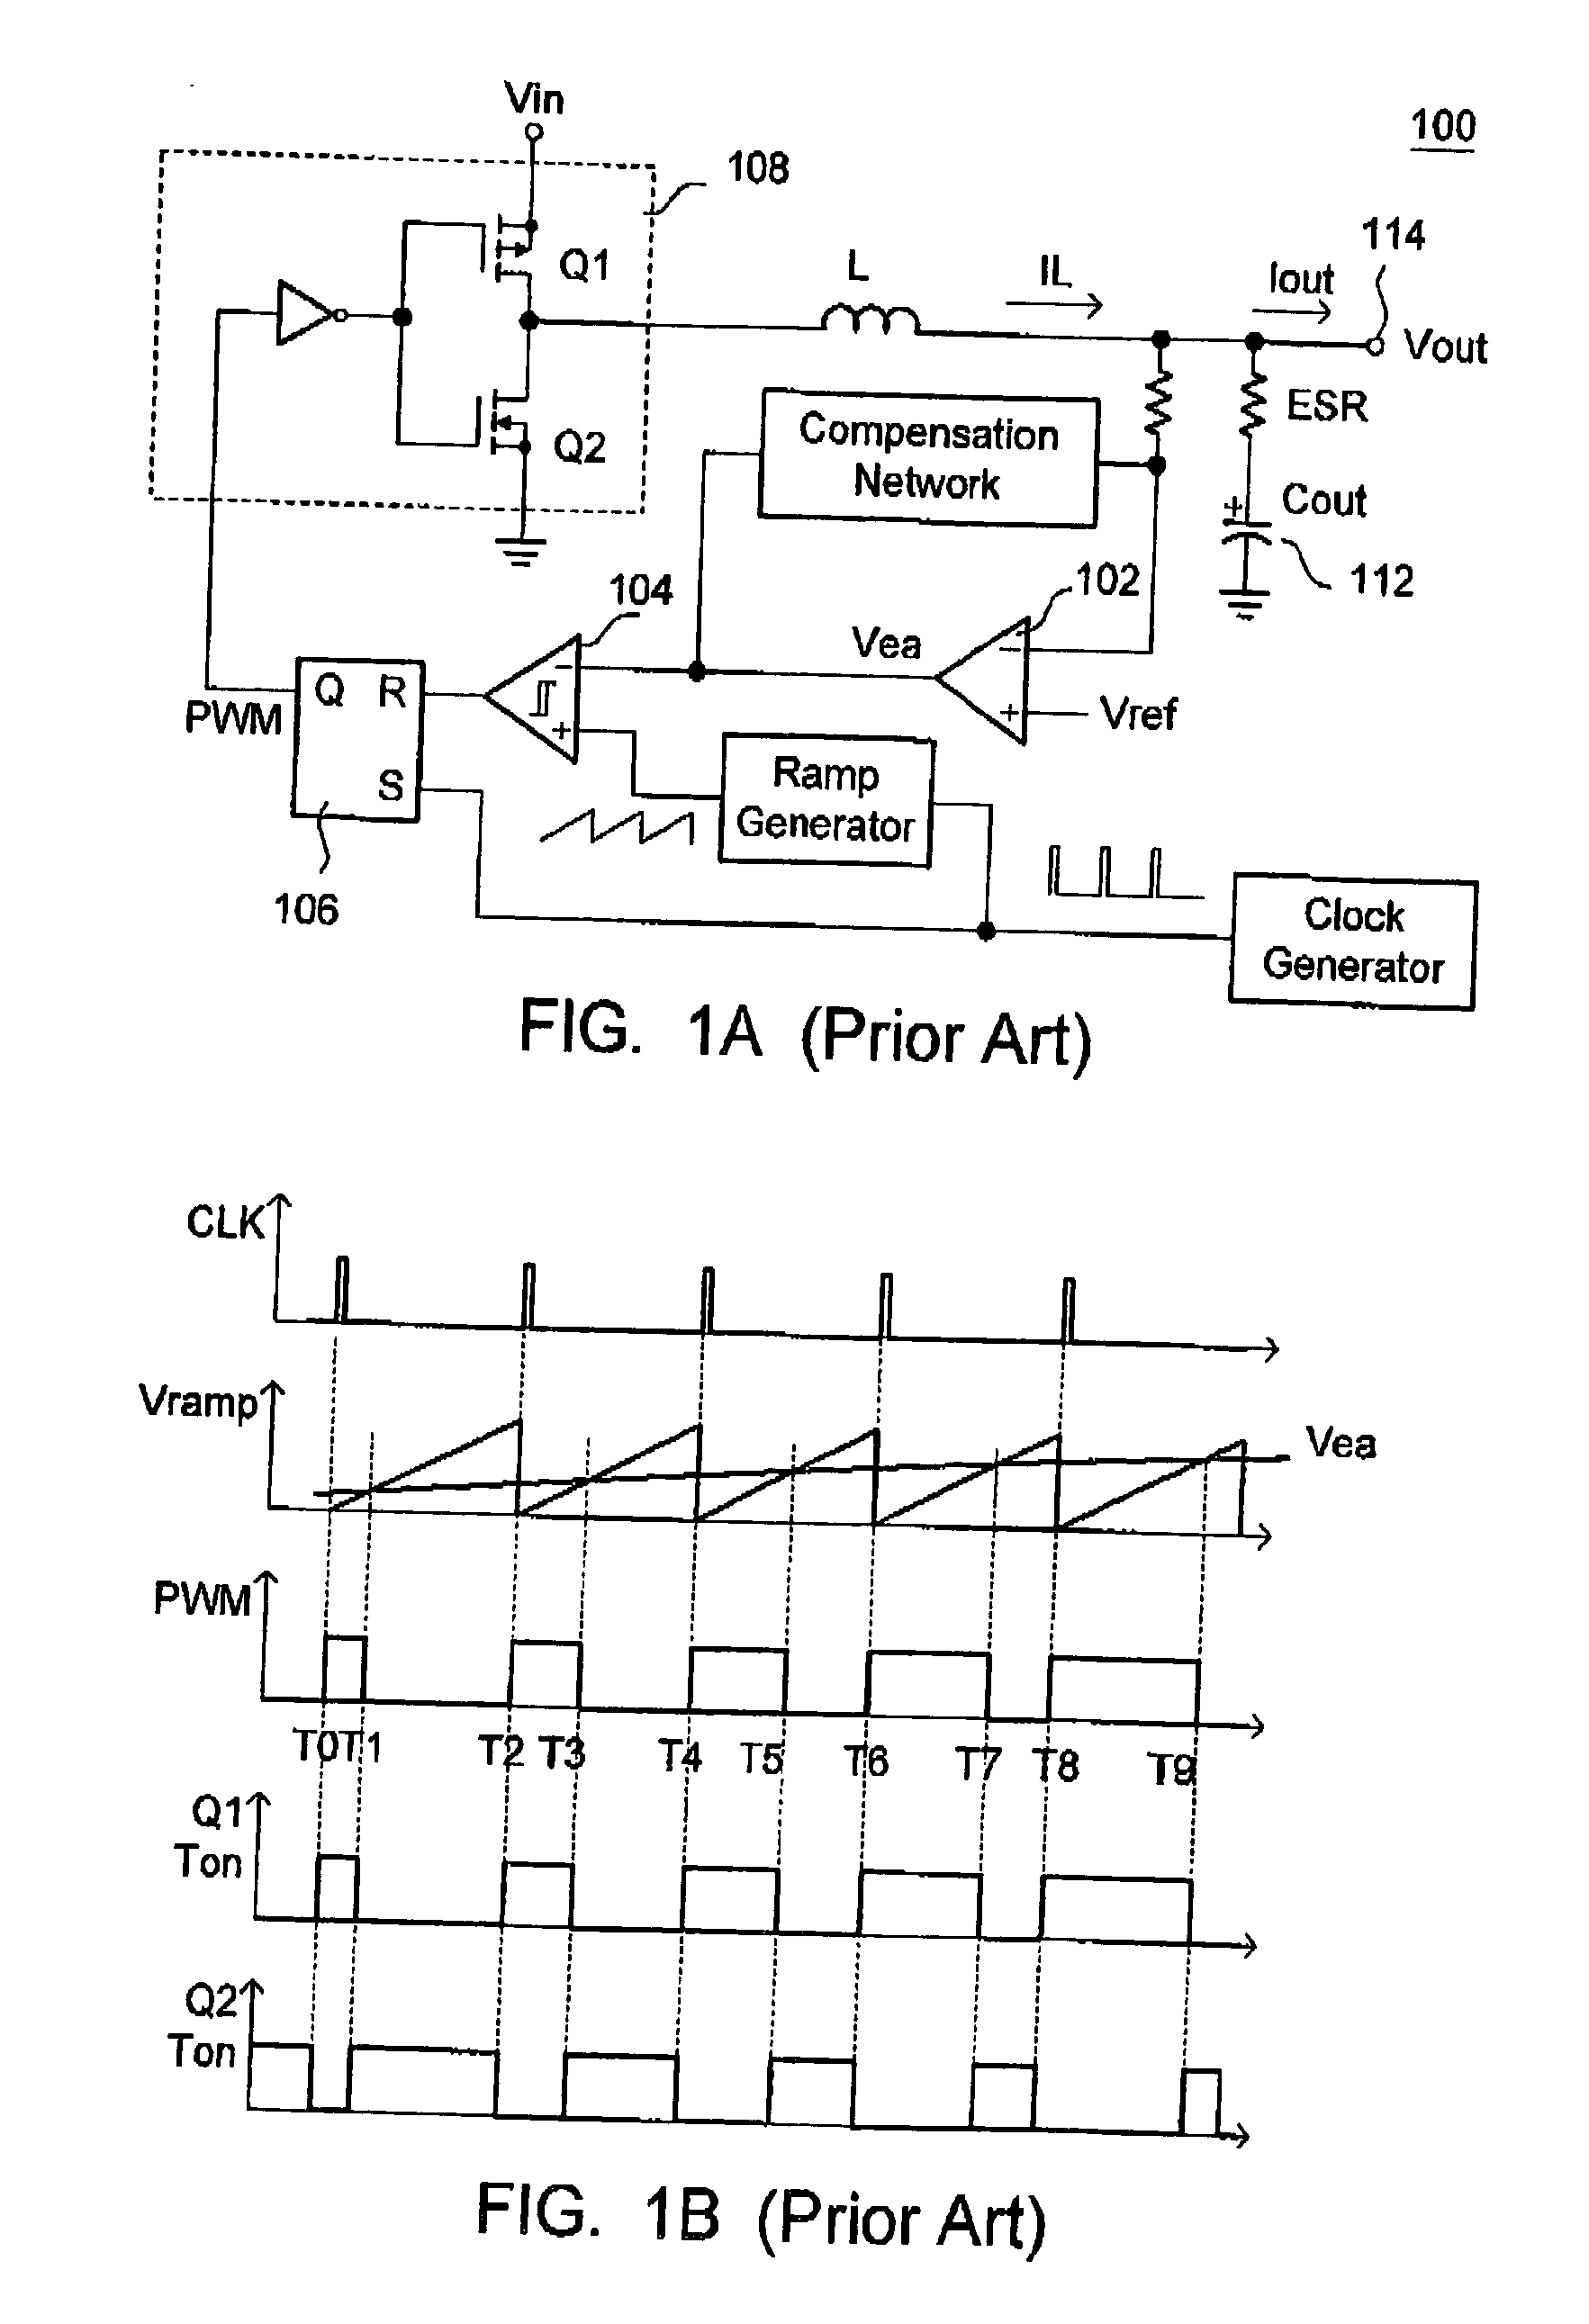 Direct mode pulse width modulation for DC to DC converters